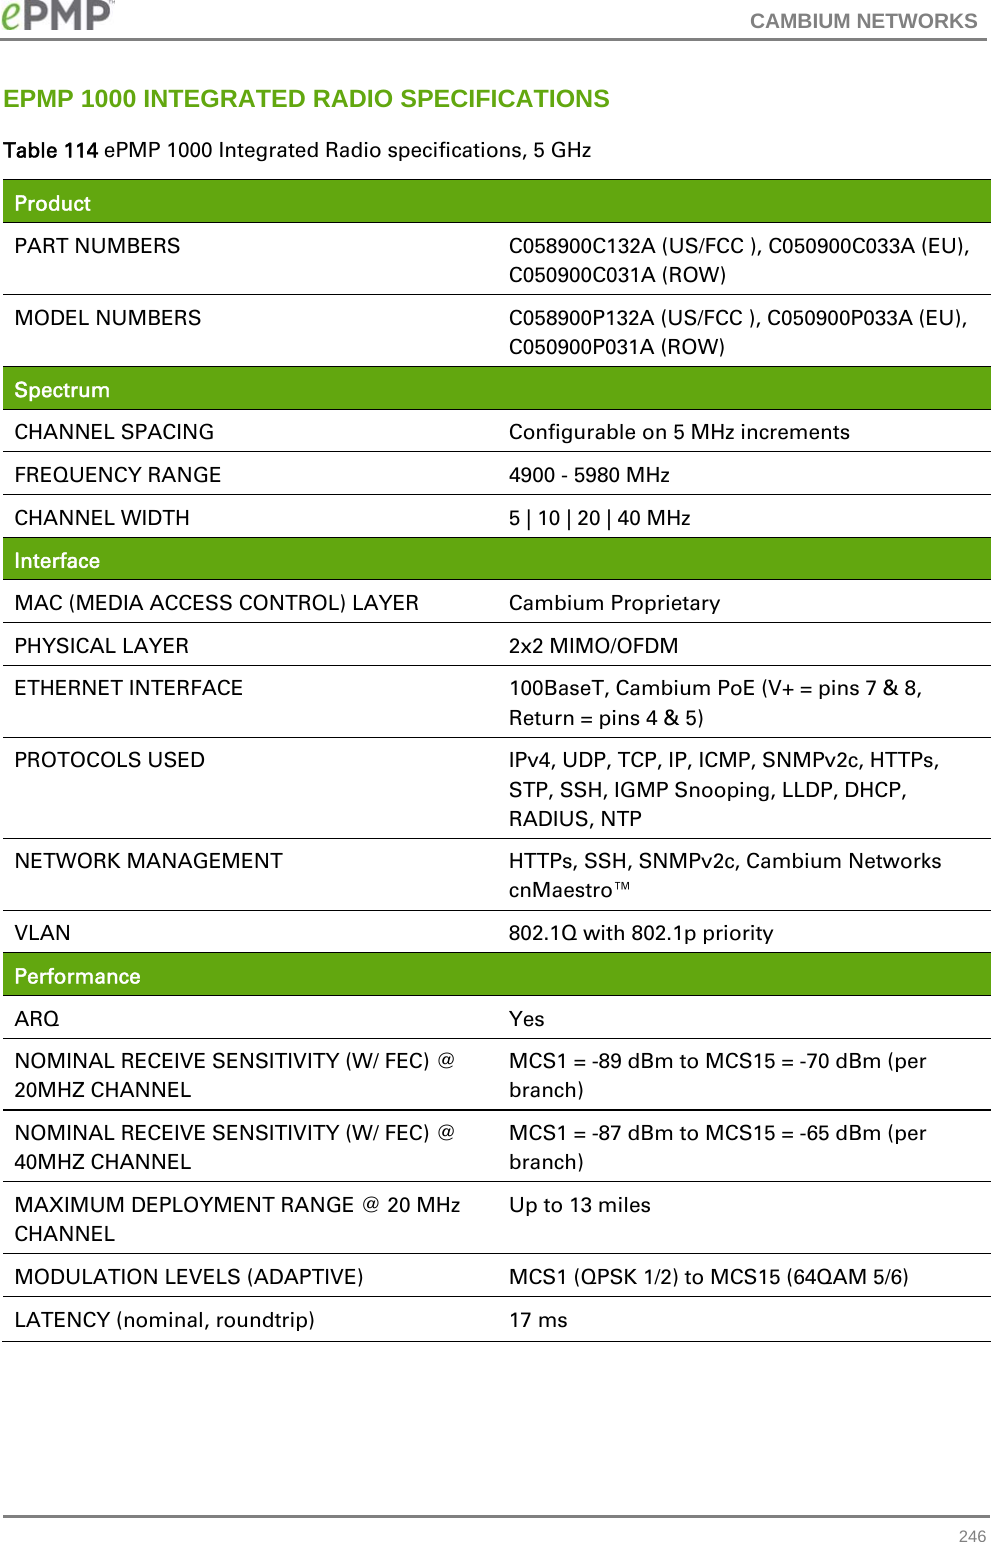 CAMBIUM NETWORKS   246EPMP 1000 INTEGRATED RADIO SPECIFICATIONS Table 114 ePMP 1000 Integrated Radio specifications, 5 GHz Product  PART NUMBERS  C058900C132A (US/FCC ), C050900C033A (EU), C050900C031A (ROW) MODEL NUMBERS  C058900P132A (US/FCC ), C050900P033A (EU), C050900P031A (ROW) Spectrum  CHANNEL SPACING  Configurable on 5 MHz increments FREQUENCY RANGE  4900 - 5980 MHz CHANNEL WIDTH  5 | 10 | 20 | 40 MHz   Interface  MAC (MEDIA ACCESS CONTROL) LAYER  Cambium Proprietary PHYSICAL LAYER  2x2 MIMO/OFDM ETHERNET INTERFACE  100BaseT, Cambium PoE (V+ = pins 7 &amp; 8, Return = pins 4 &amp; 5) PROTOCOLS USED  IPv4, UDP, TCP, IP, ICMP, SNMPv2c, HTTPs, STP, SSH, IGMP Snooping, LLDP, DHCP, RADIUS, NTP  NETWORK MANAGEMENT  HTTPs, SSH, SNMPv2c, Cambium Networks cnMaestro™ VLAN  802.1Q with 802.1p priority Performance  ARQ Yes NOMINAL RECEIVE SENSITIVITY (W/ FEC) @ 20MHZ CHANNEL MCS1 = -89 dBm to MCS15 = -70 dBm (per branch) NOMINAL RECEIVE SENSITIVITY (W/ FEC) @ 40MHZ CHANNEL MCS1 = -87 dBm to MCS15 = -65 dBm (per branch) MAXIMUM DEPLOYMENT RANGE @ 20 MHz CHANNEL Up to 13 miles MODULATION LEVELS (ADAPTIVE)  MCS1 (QPSK 1/2) to MCS15 (64QAM 5/6) LATENCY (nominal, roundtrip)  17 ms 